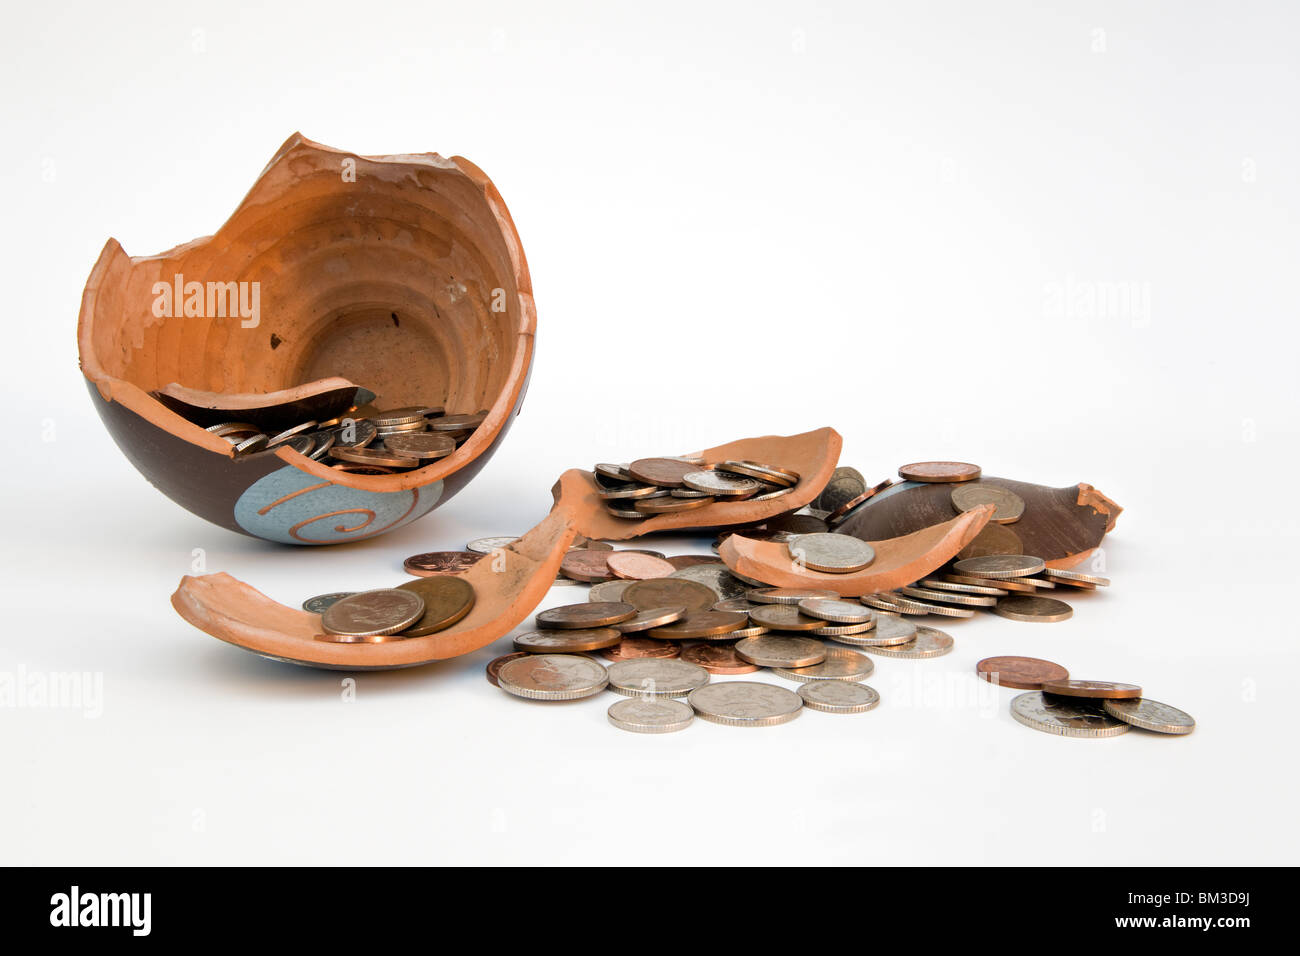 Broken terramundi savings pot with money spilling out over table against a white background Stock Photo